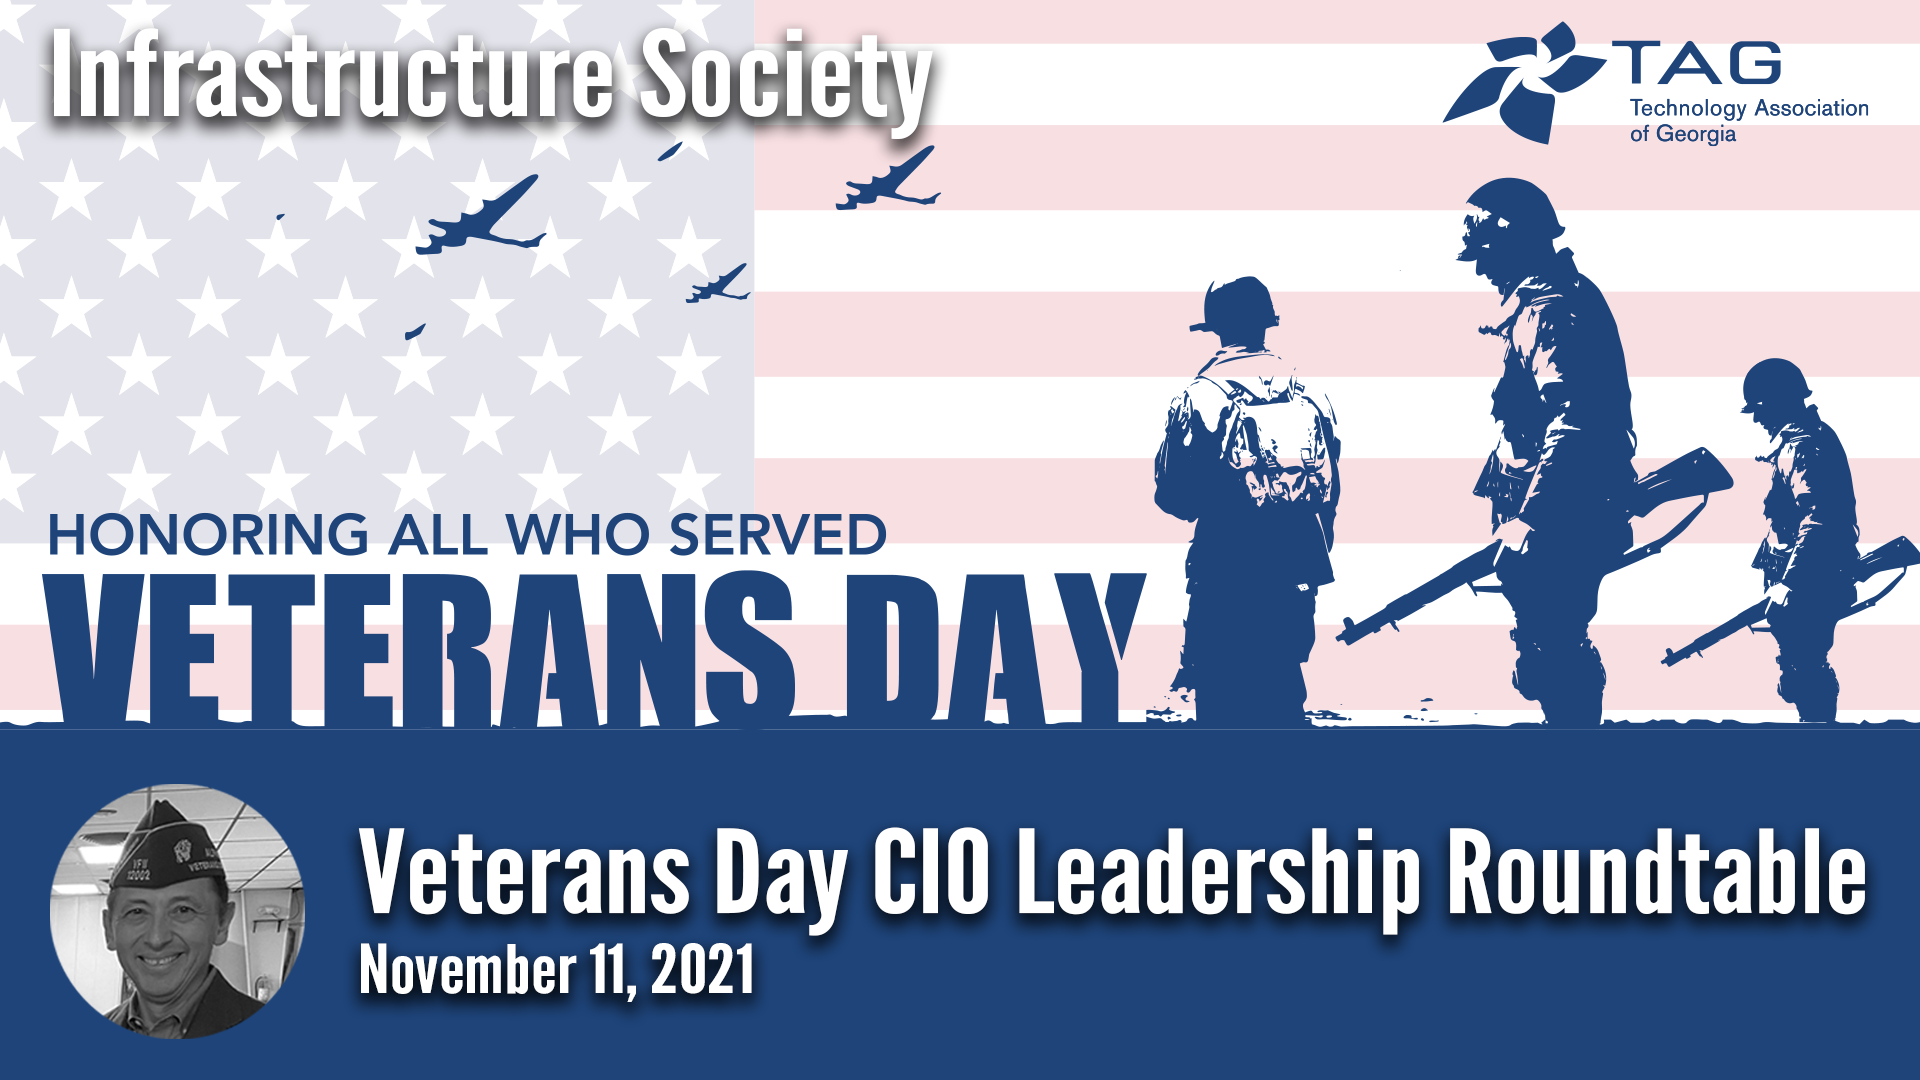 TAG Infrastructure Society: Veterans Day CIO Leadership Roundtable